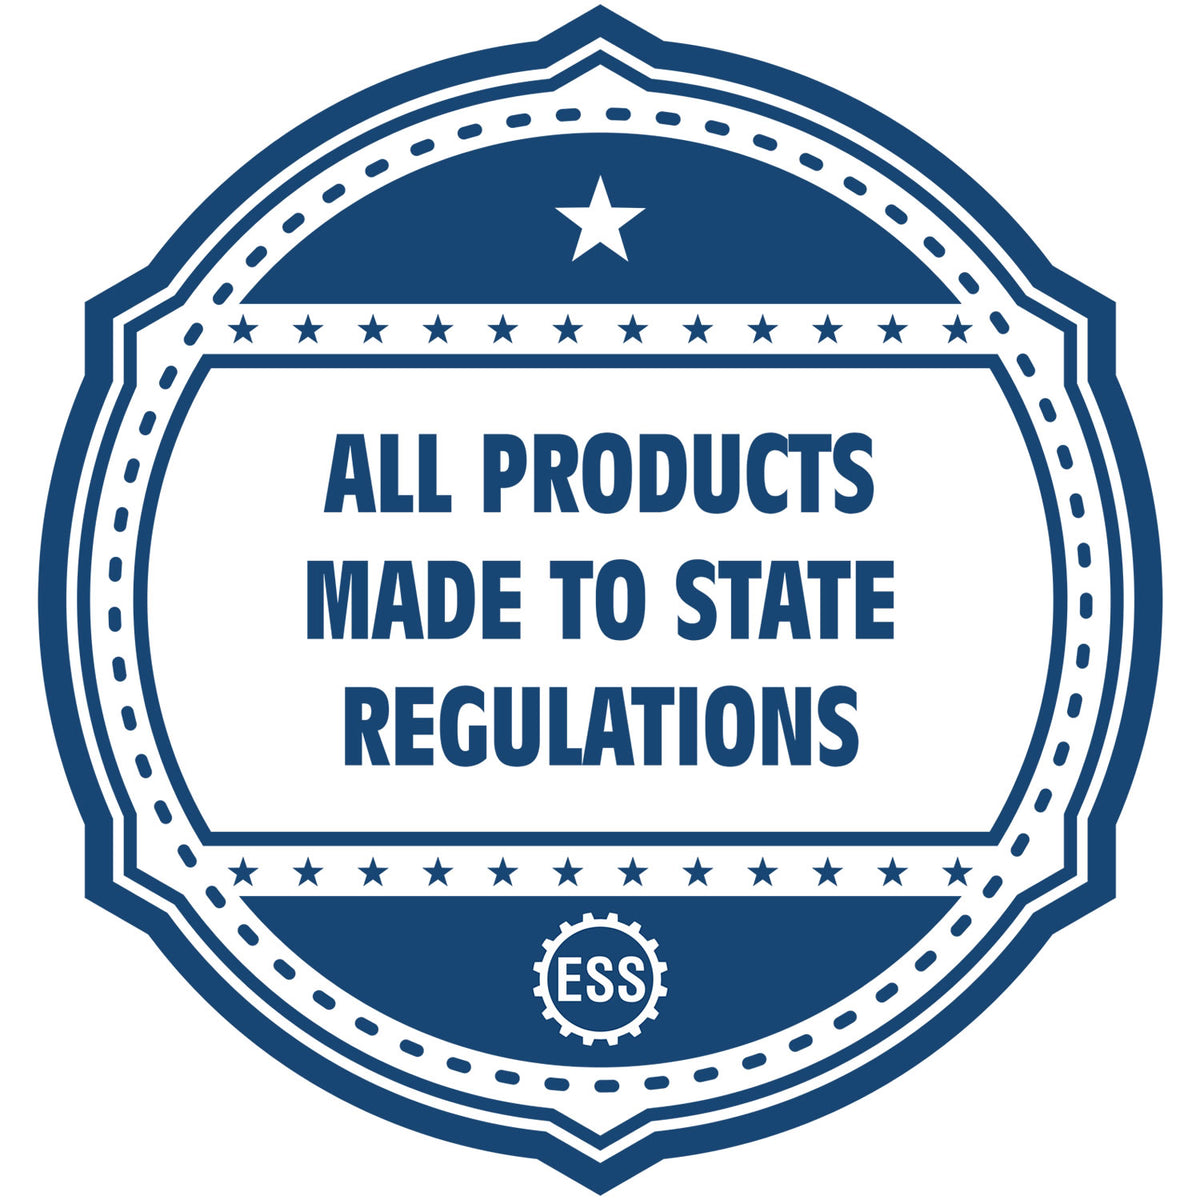 An icon or badge element for the State of Nebraska Soft Land Surveyor Embossing Seal showing that this product is made in compliance with state regulations.